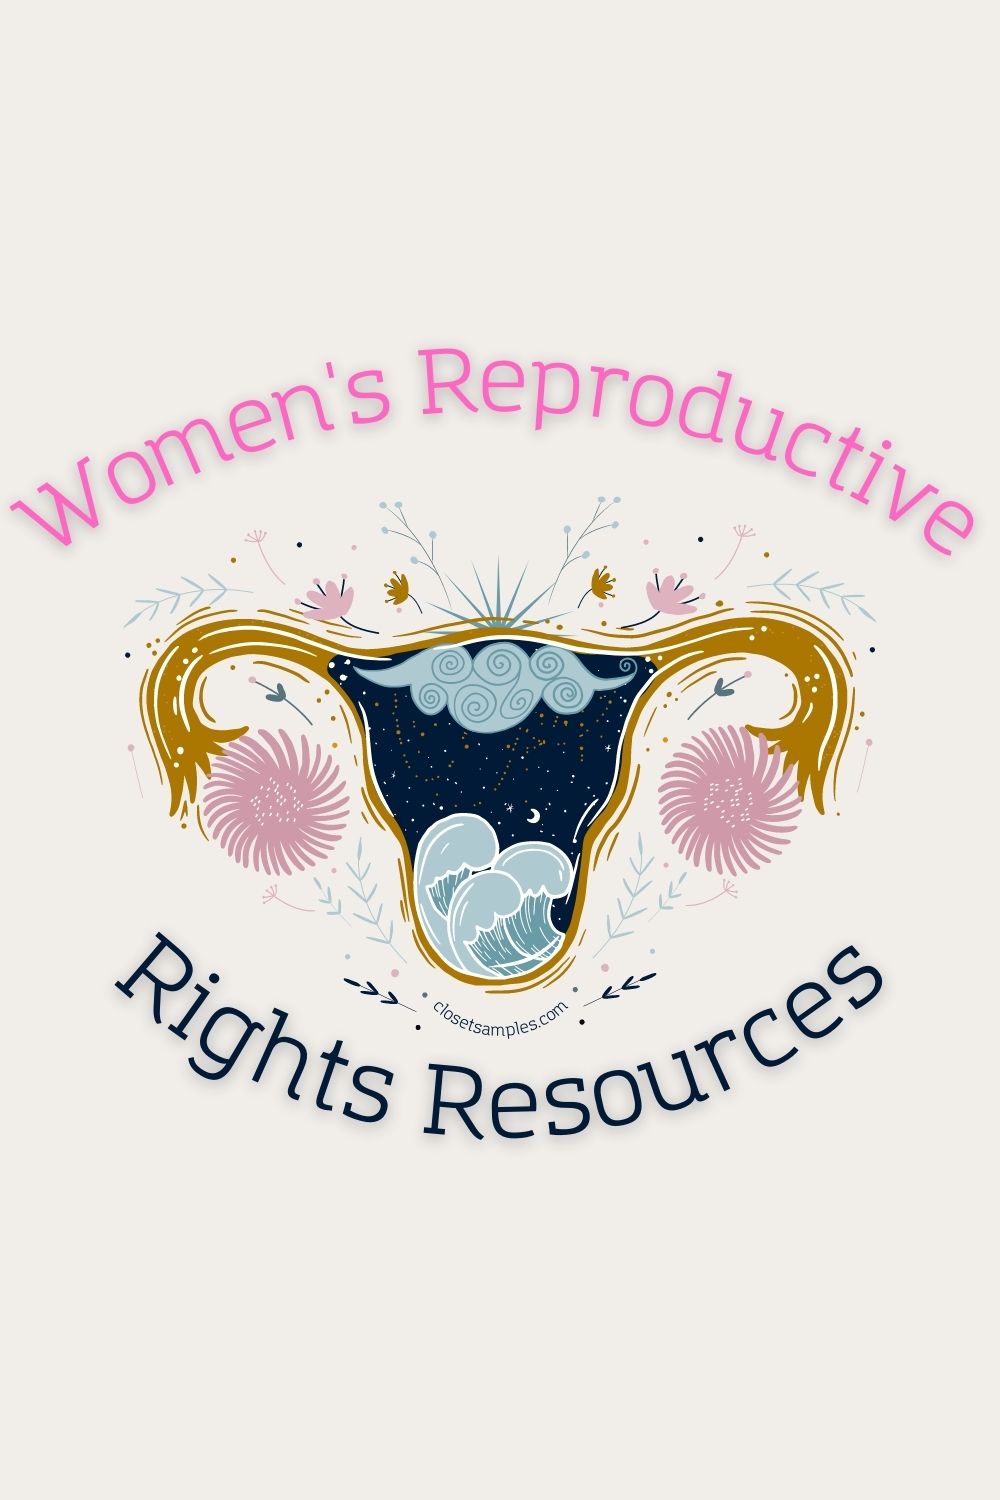 Womens Reproductive Rights Resources Closetsamples Pinterest